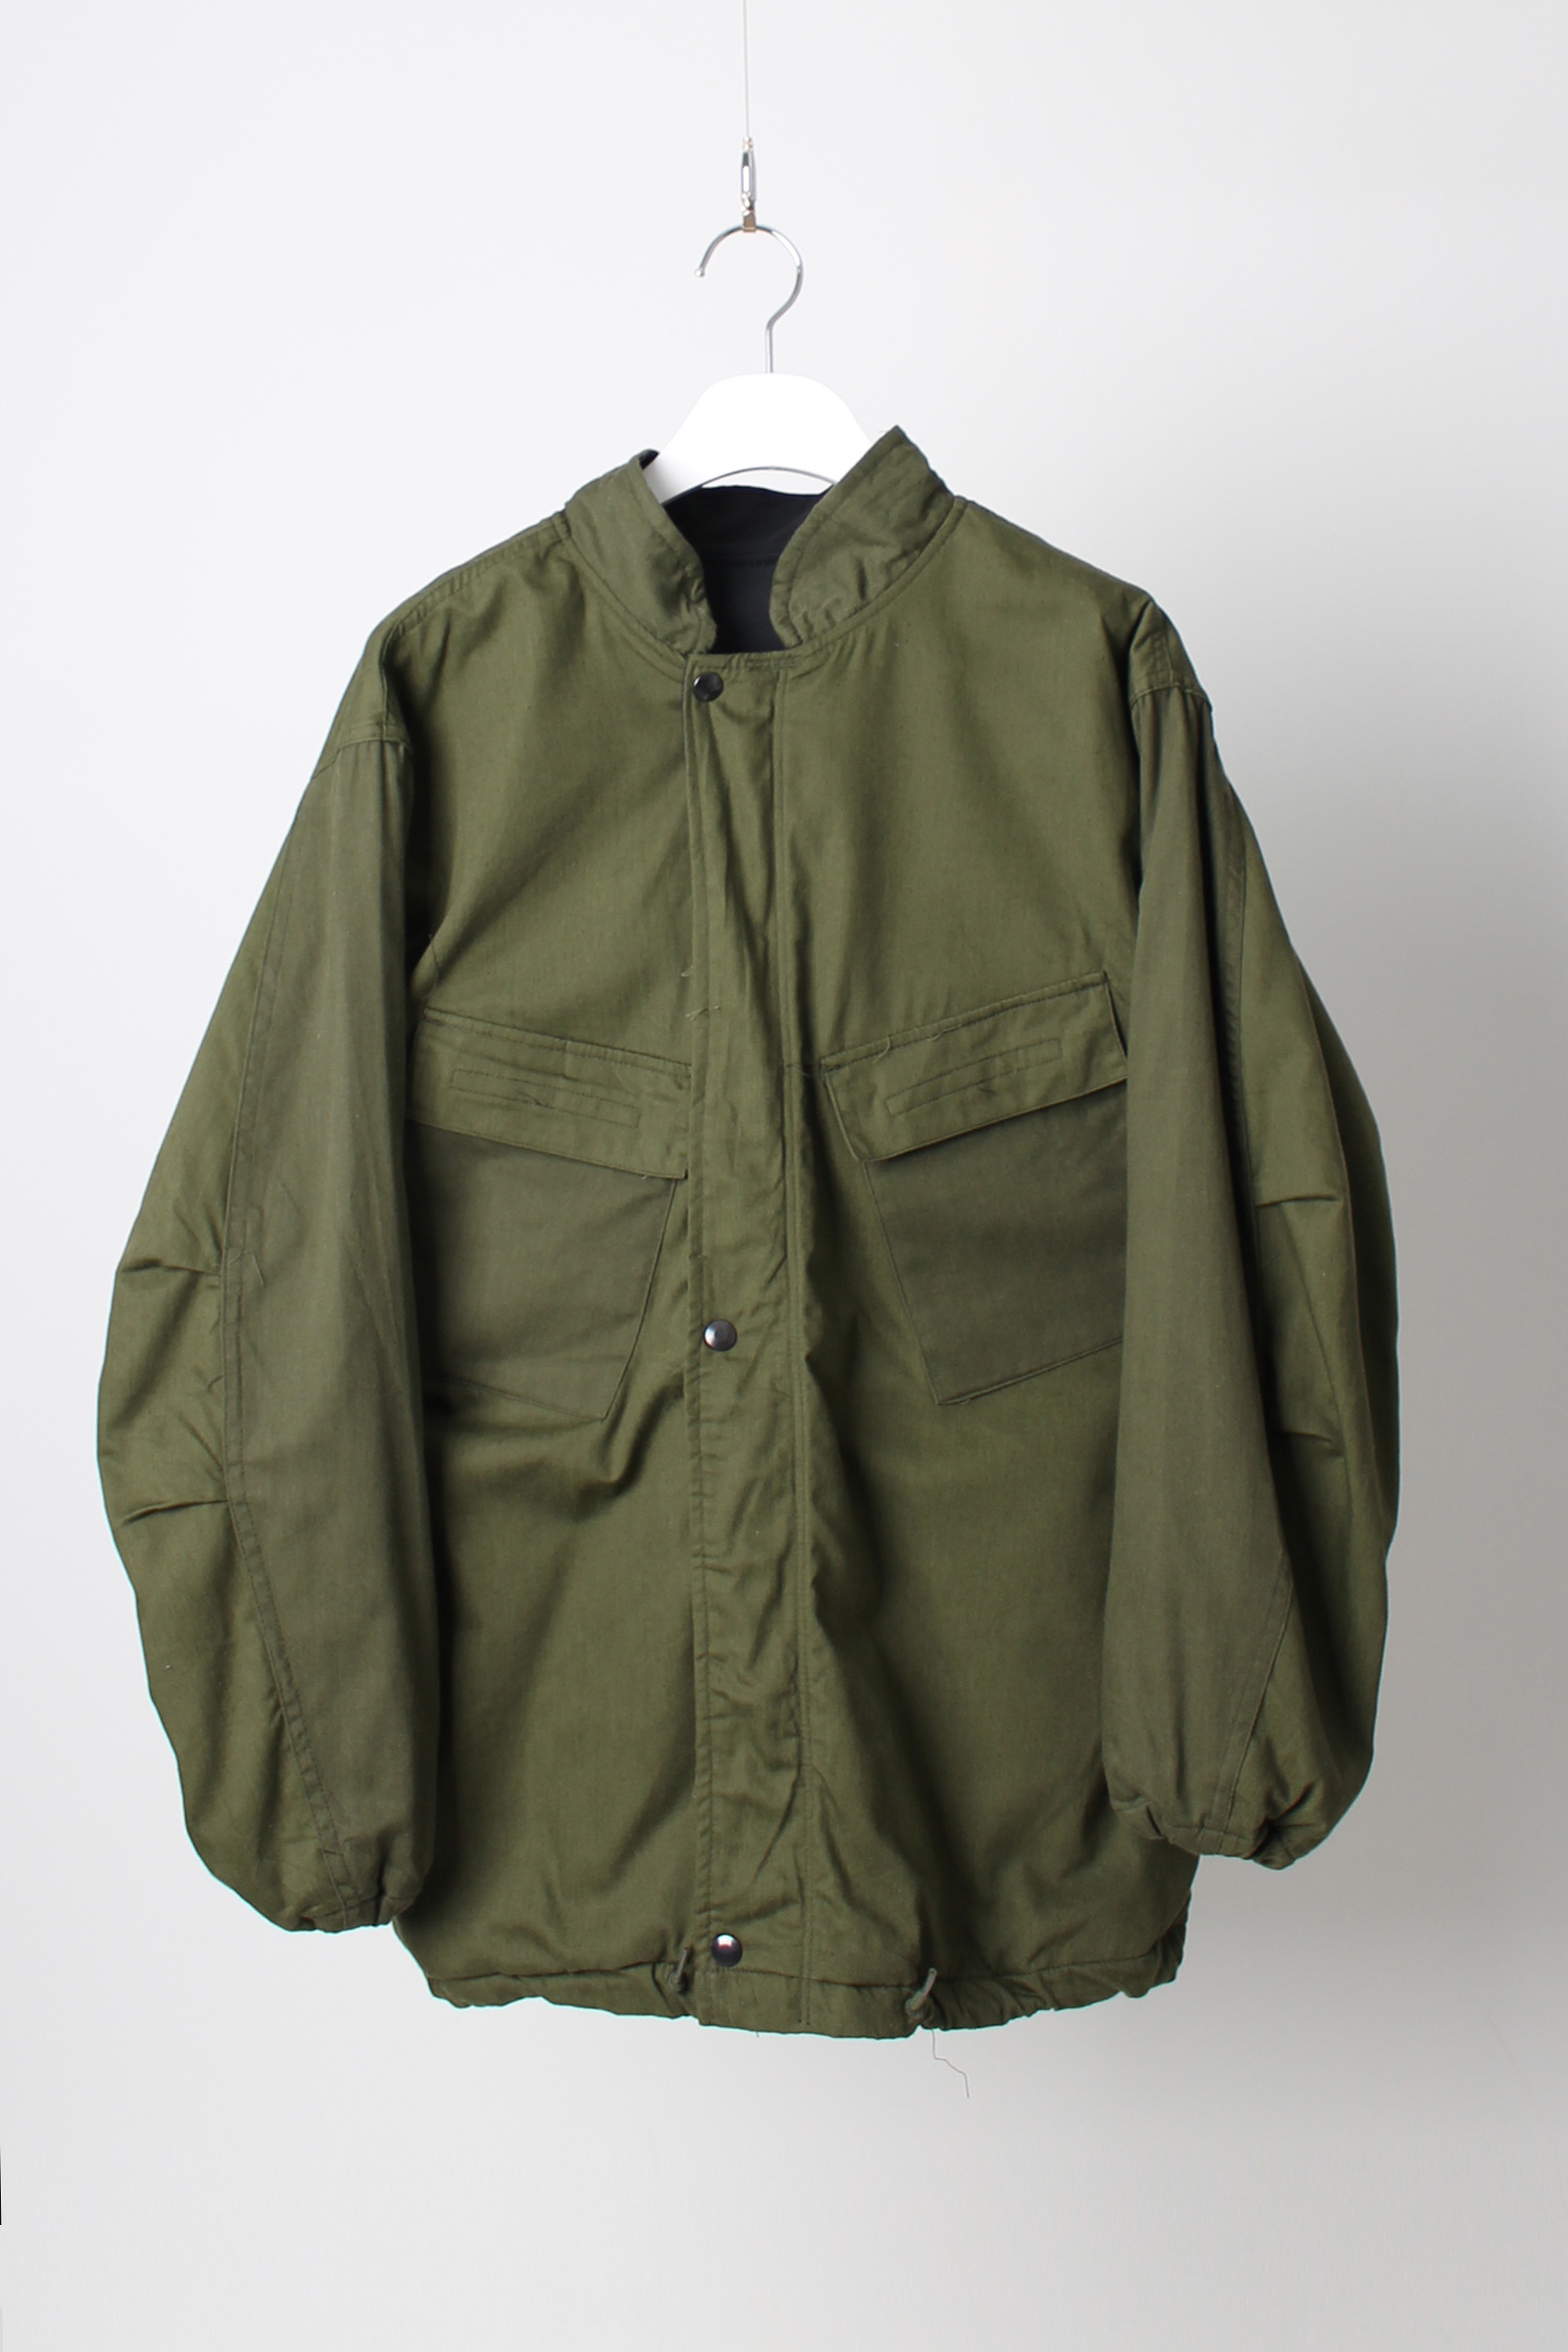 Military Green Chemical Protective Jacket